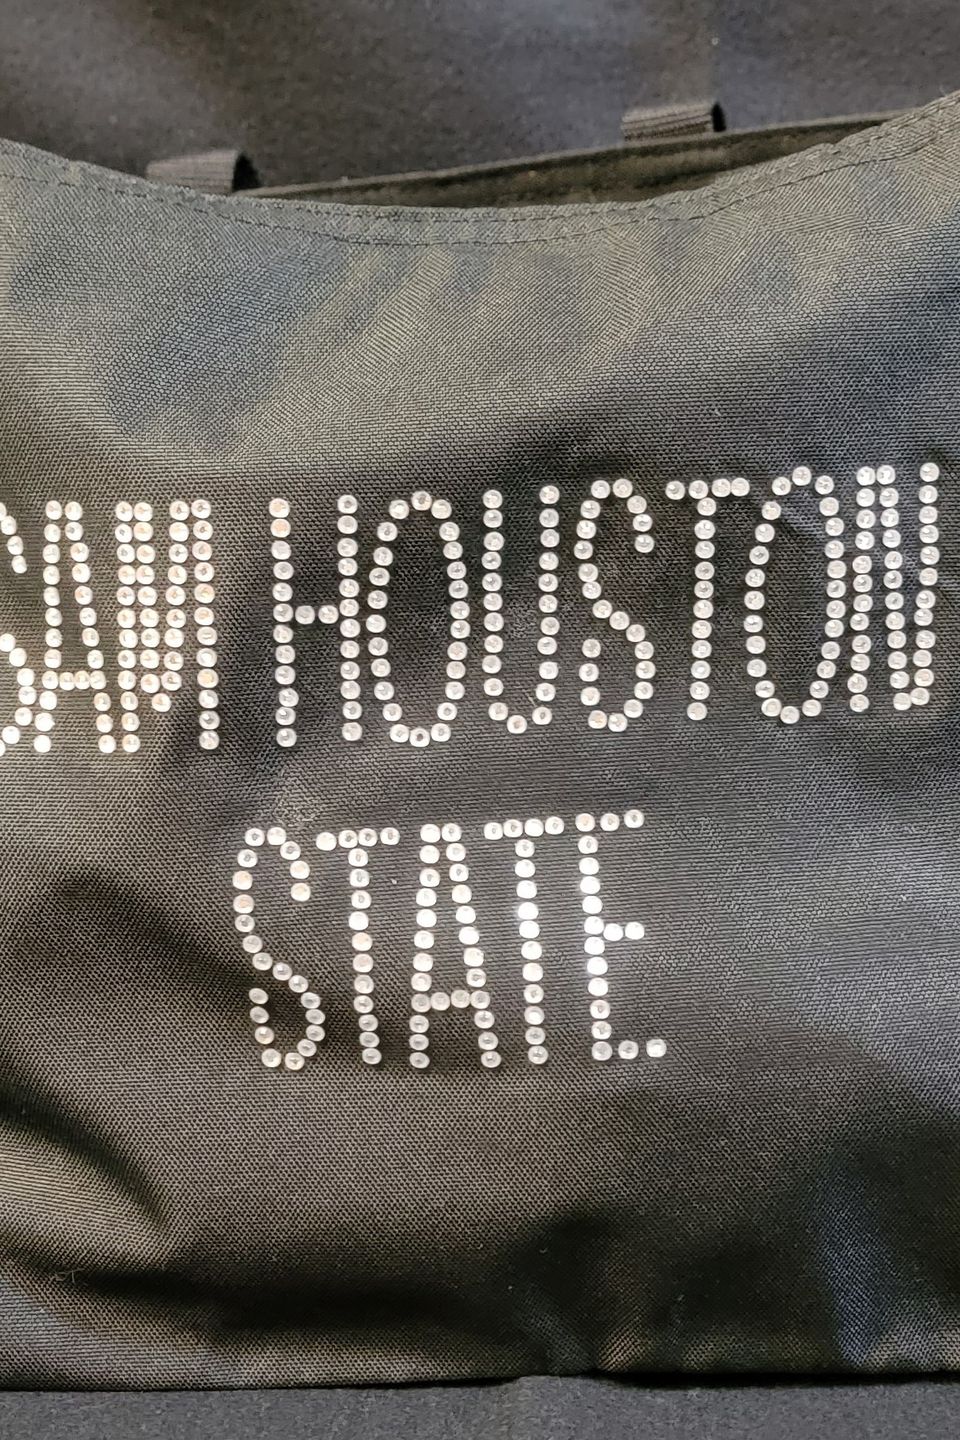 This is an example of a navy tote bag decorated with rhinestone bling that reads "Sam Houston State".